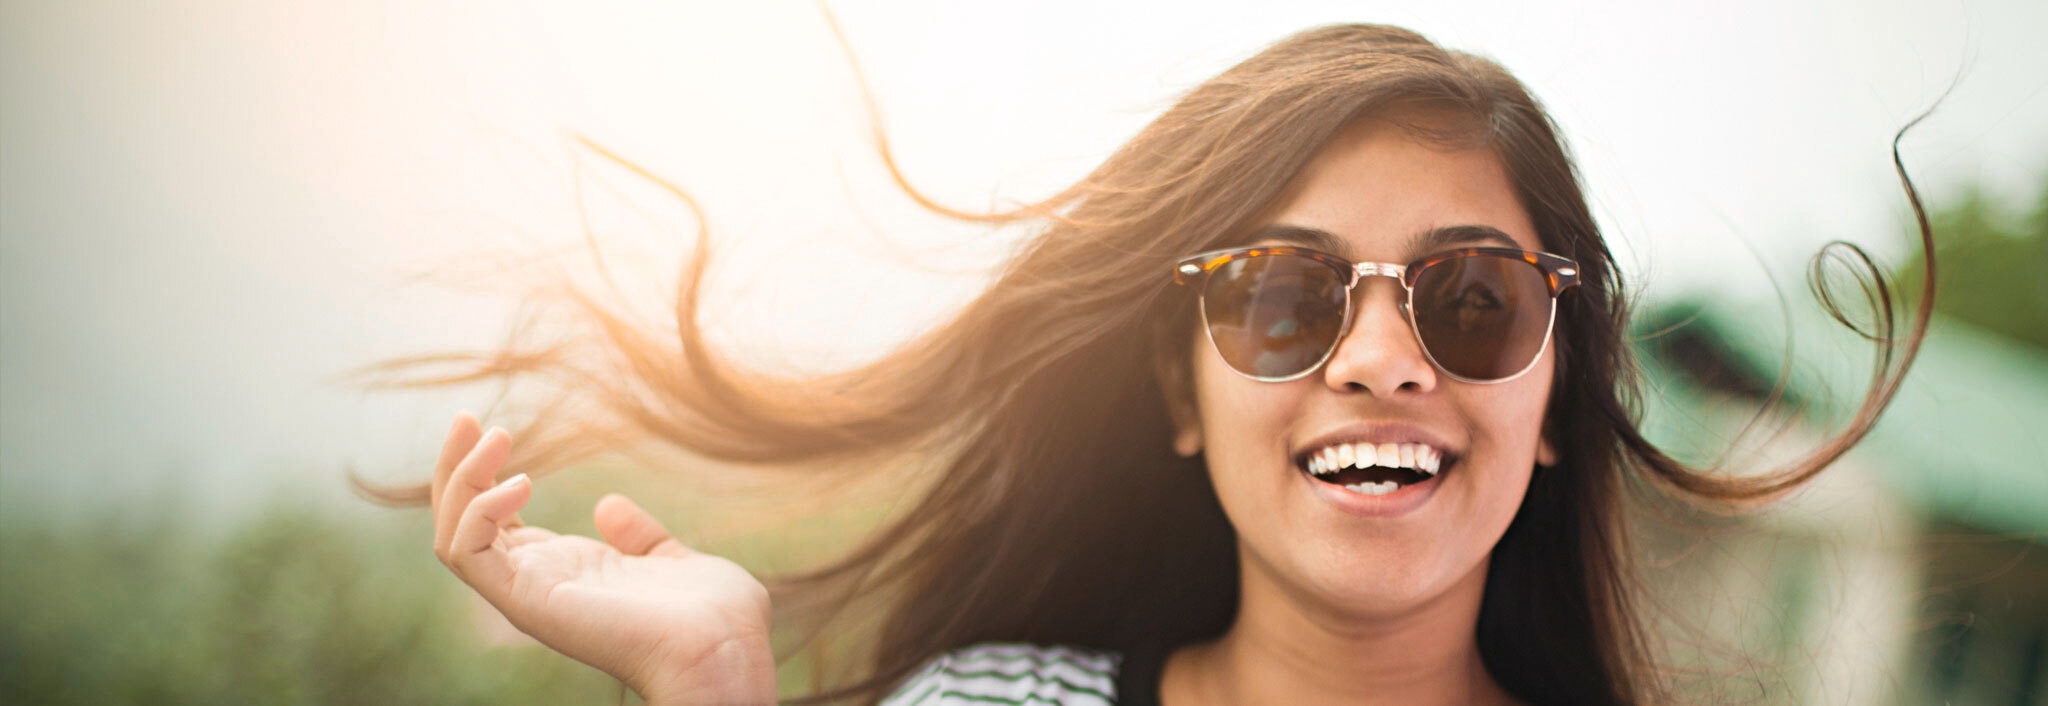 A smiling woman wearing sunglasses, her wavy black hair blowing gently in the wind.